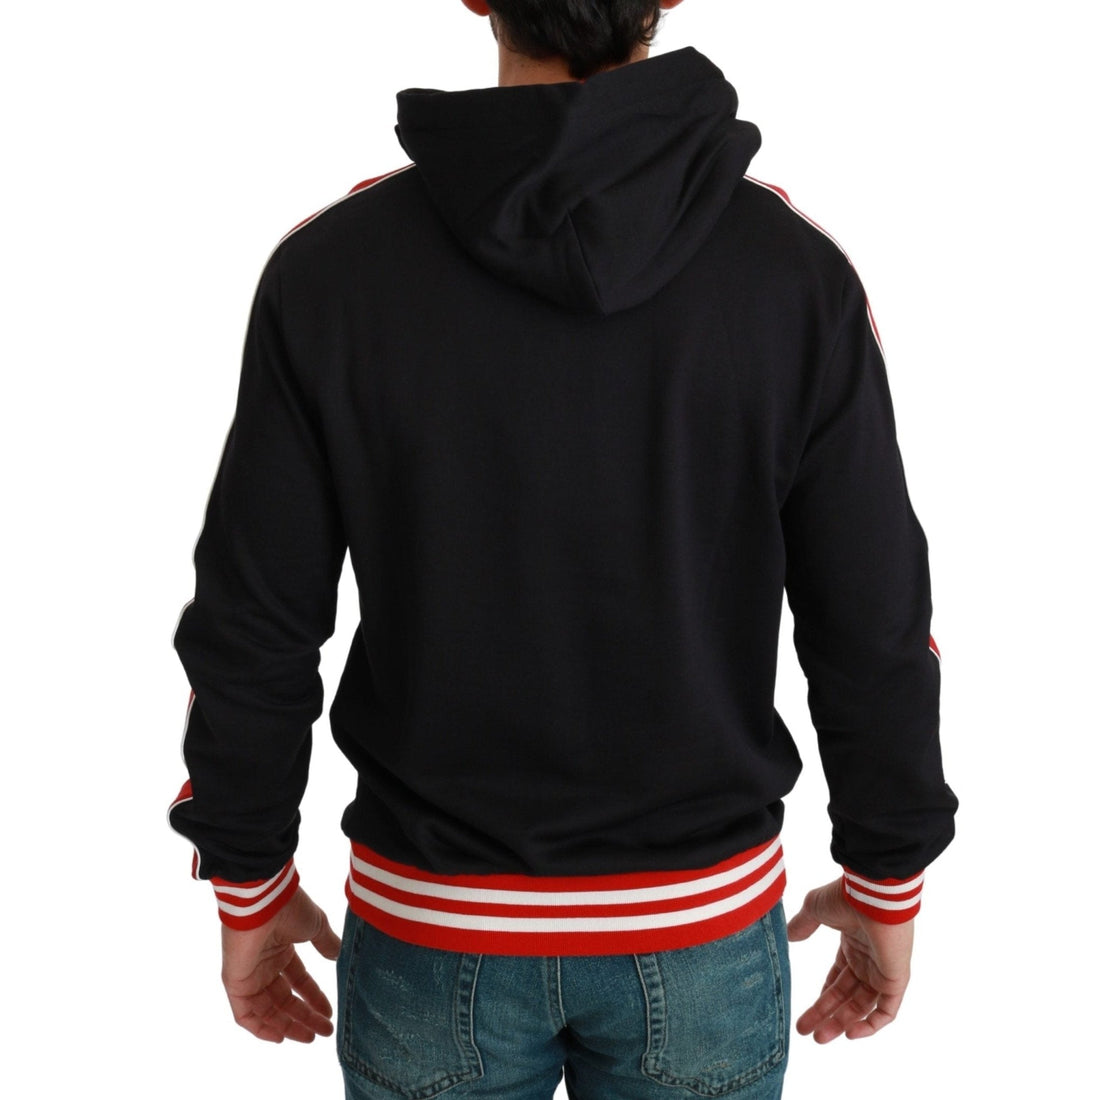 Dolce & Gabbana Elegant Black Hooded Sweater with Multicolor Motif